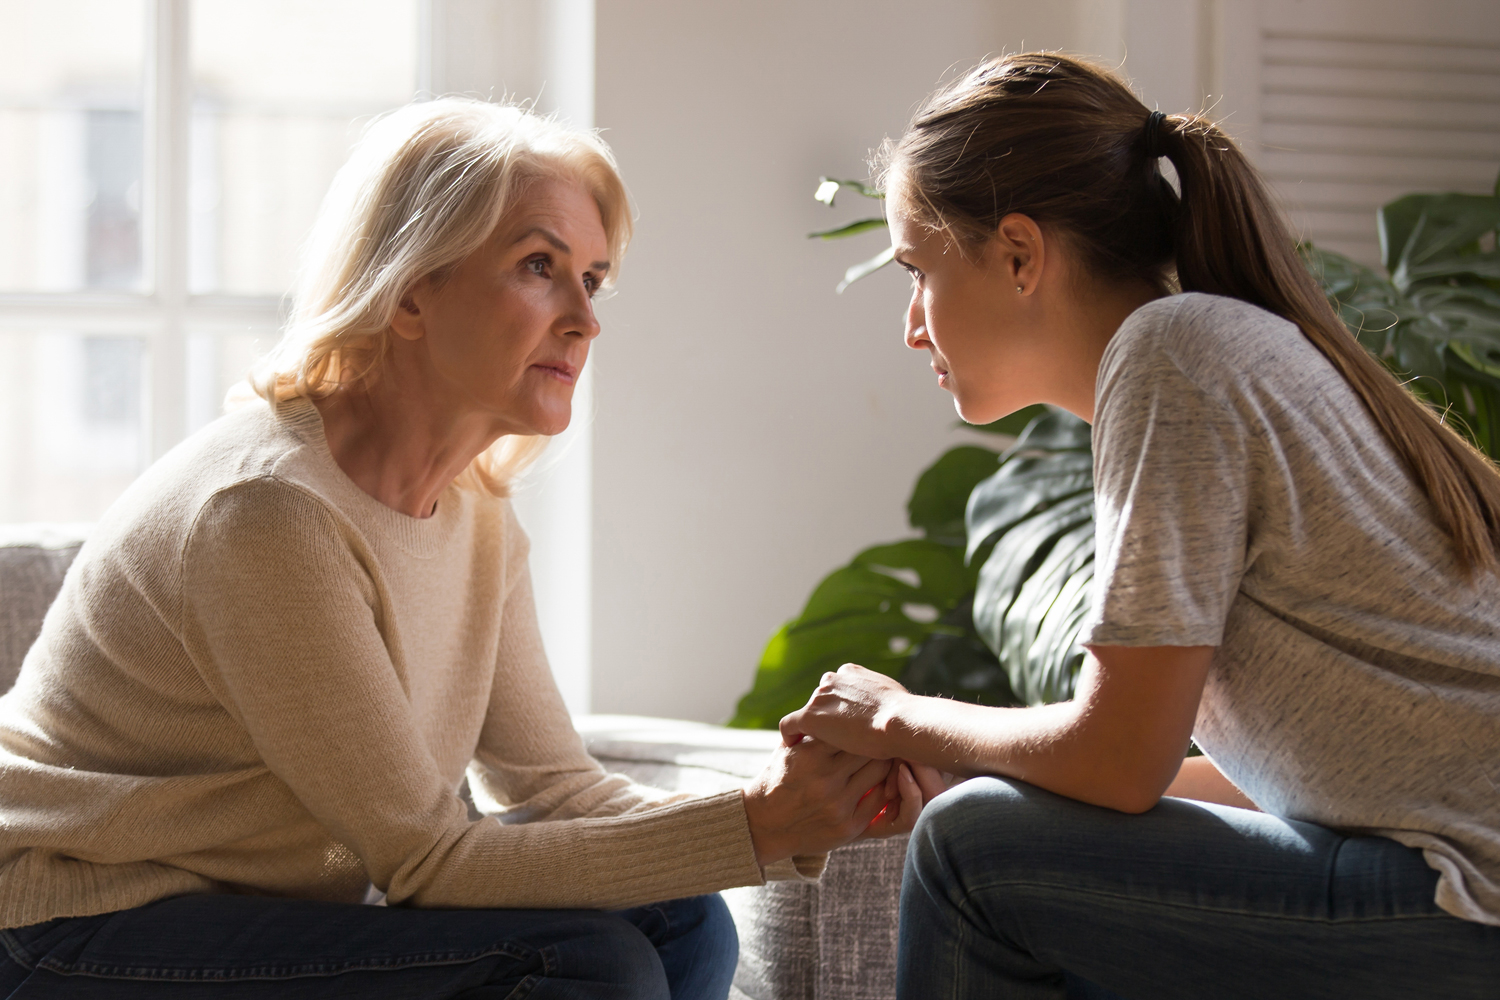 How do I talk to my caregivers about maintaining autonomy?